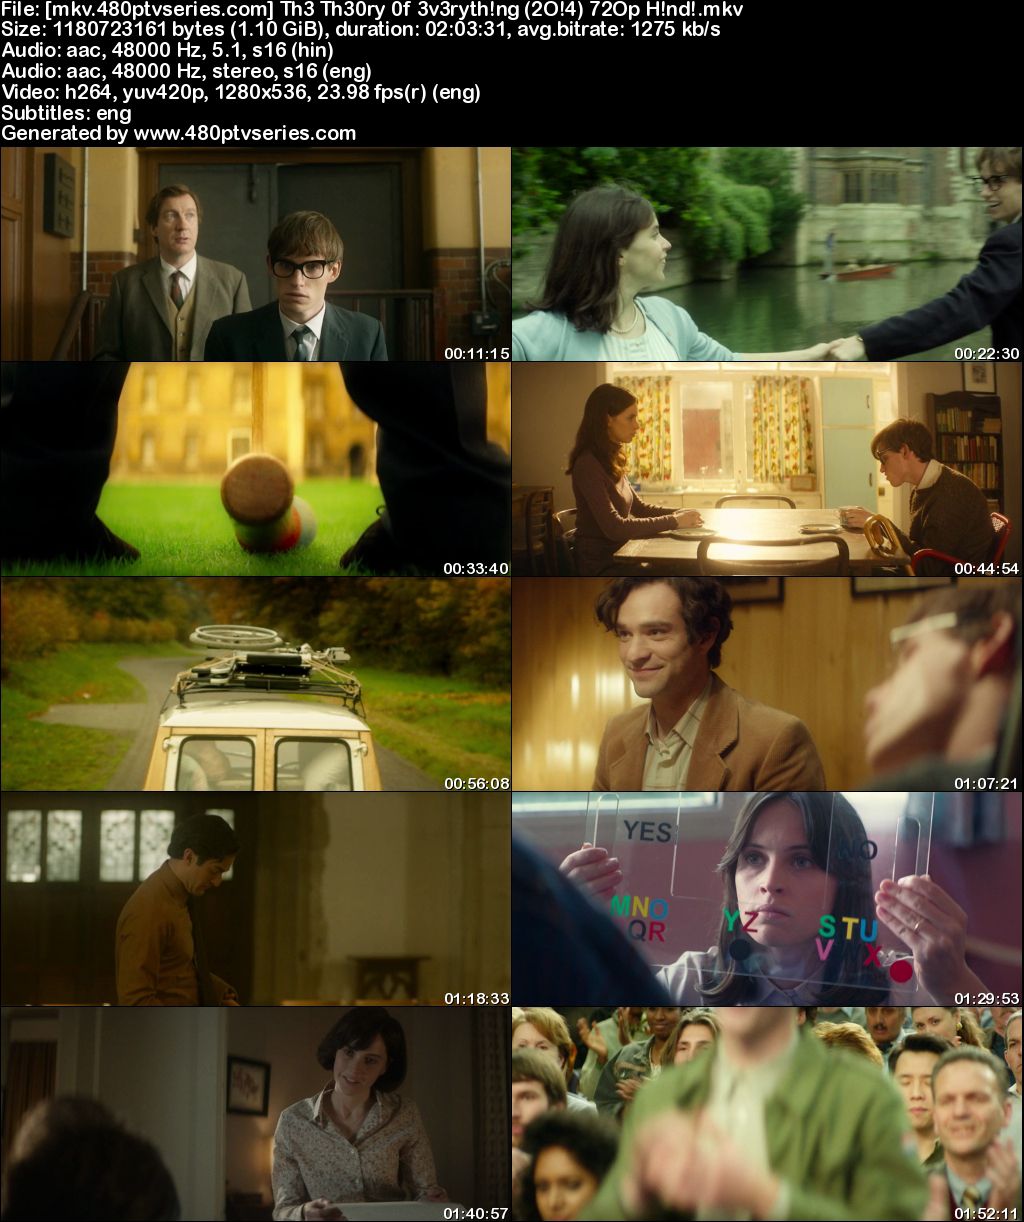 Watch Online Free The Theory of Everything (2014) Full Hindi Dual Audio Movie Download 480p 720p Bluray